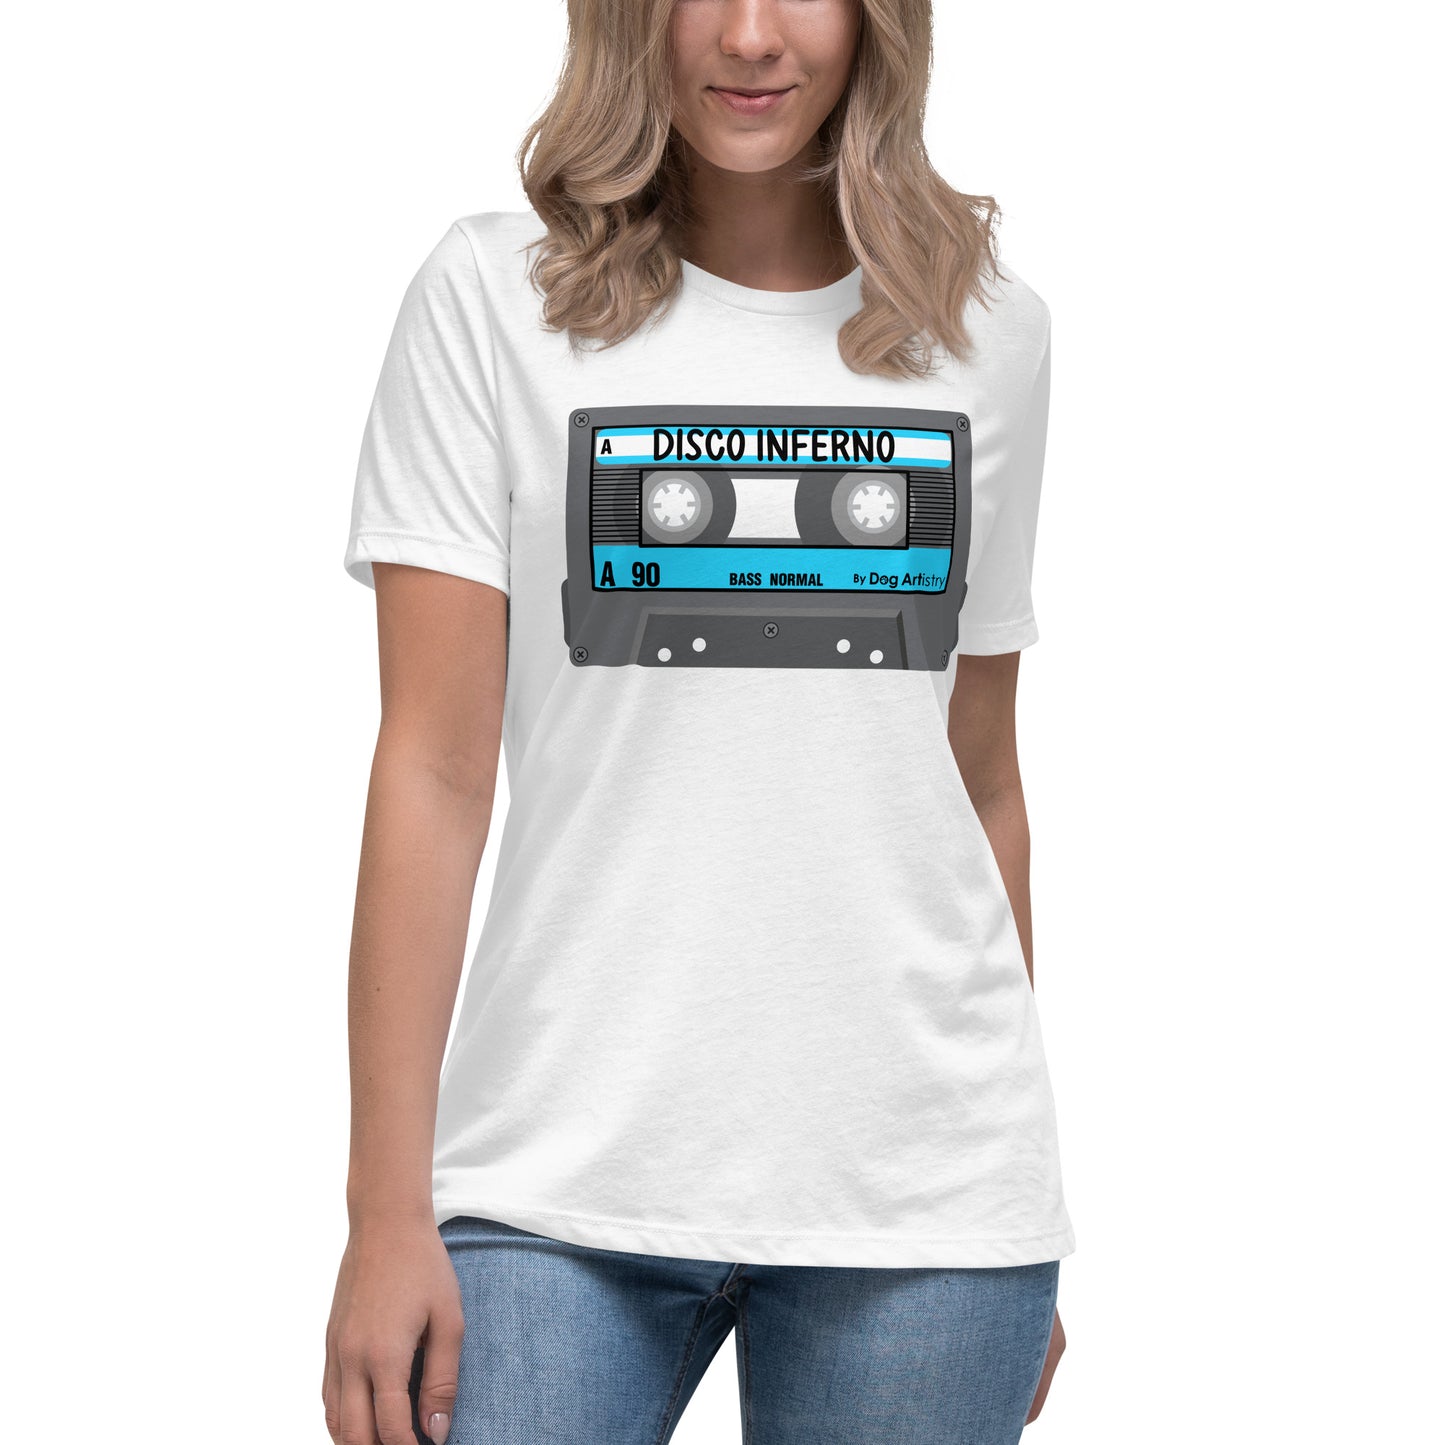 Disco Inferno Cassette Tape Women's Relaxed T-Shirt by Dog Artistry